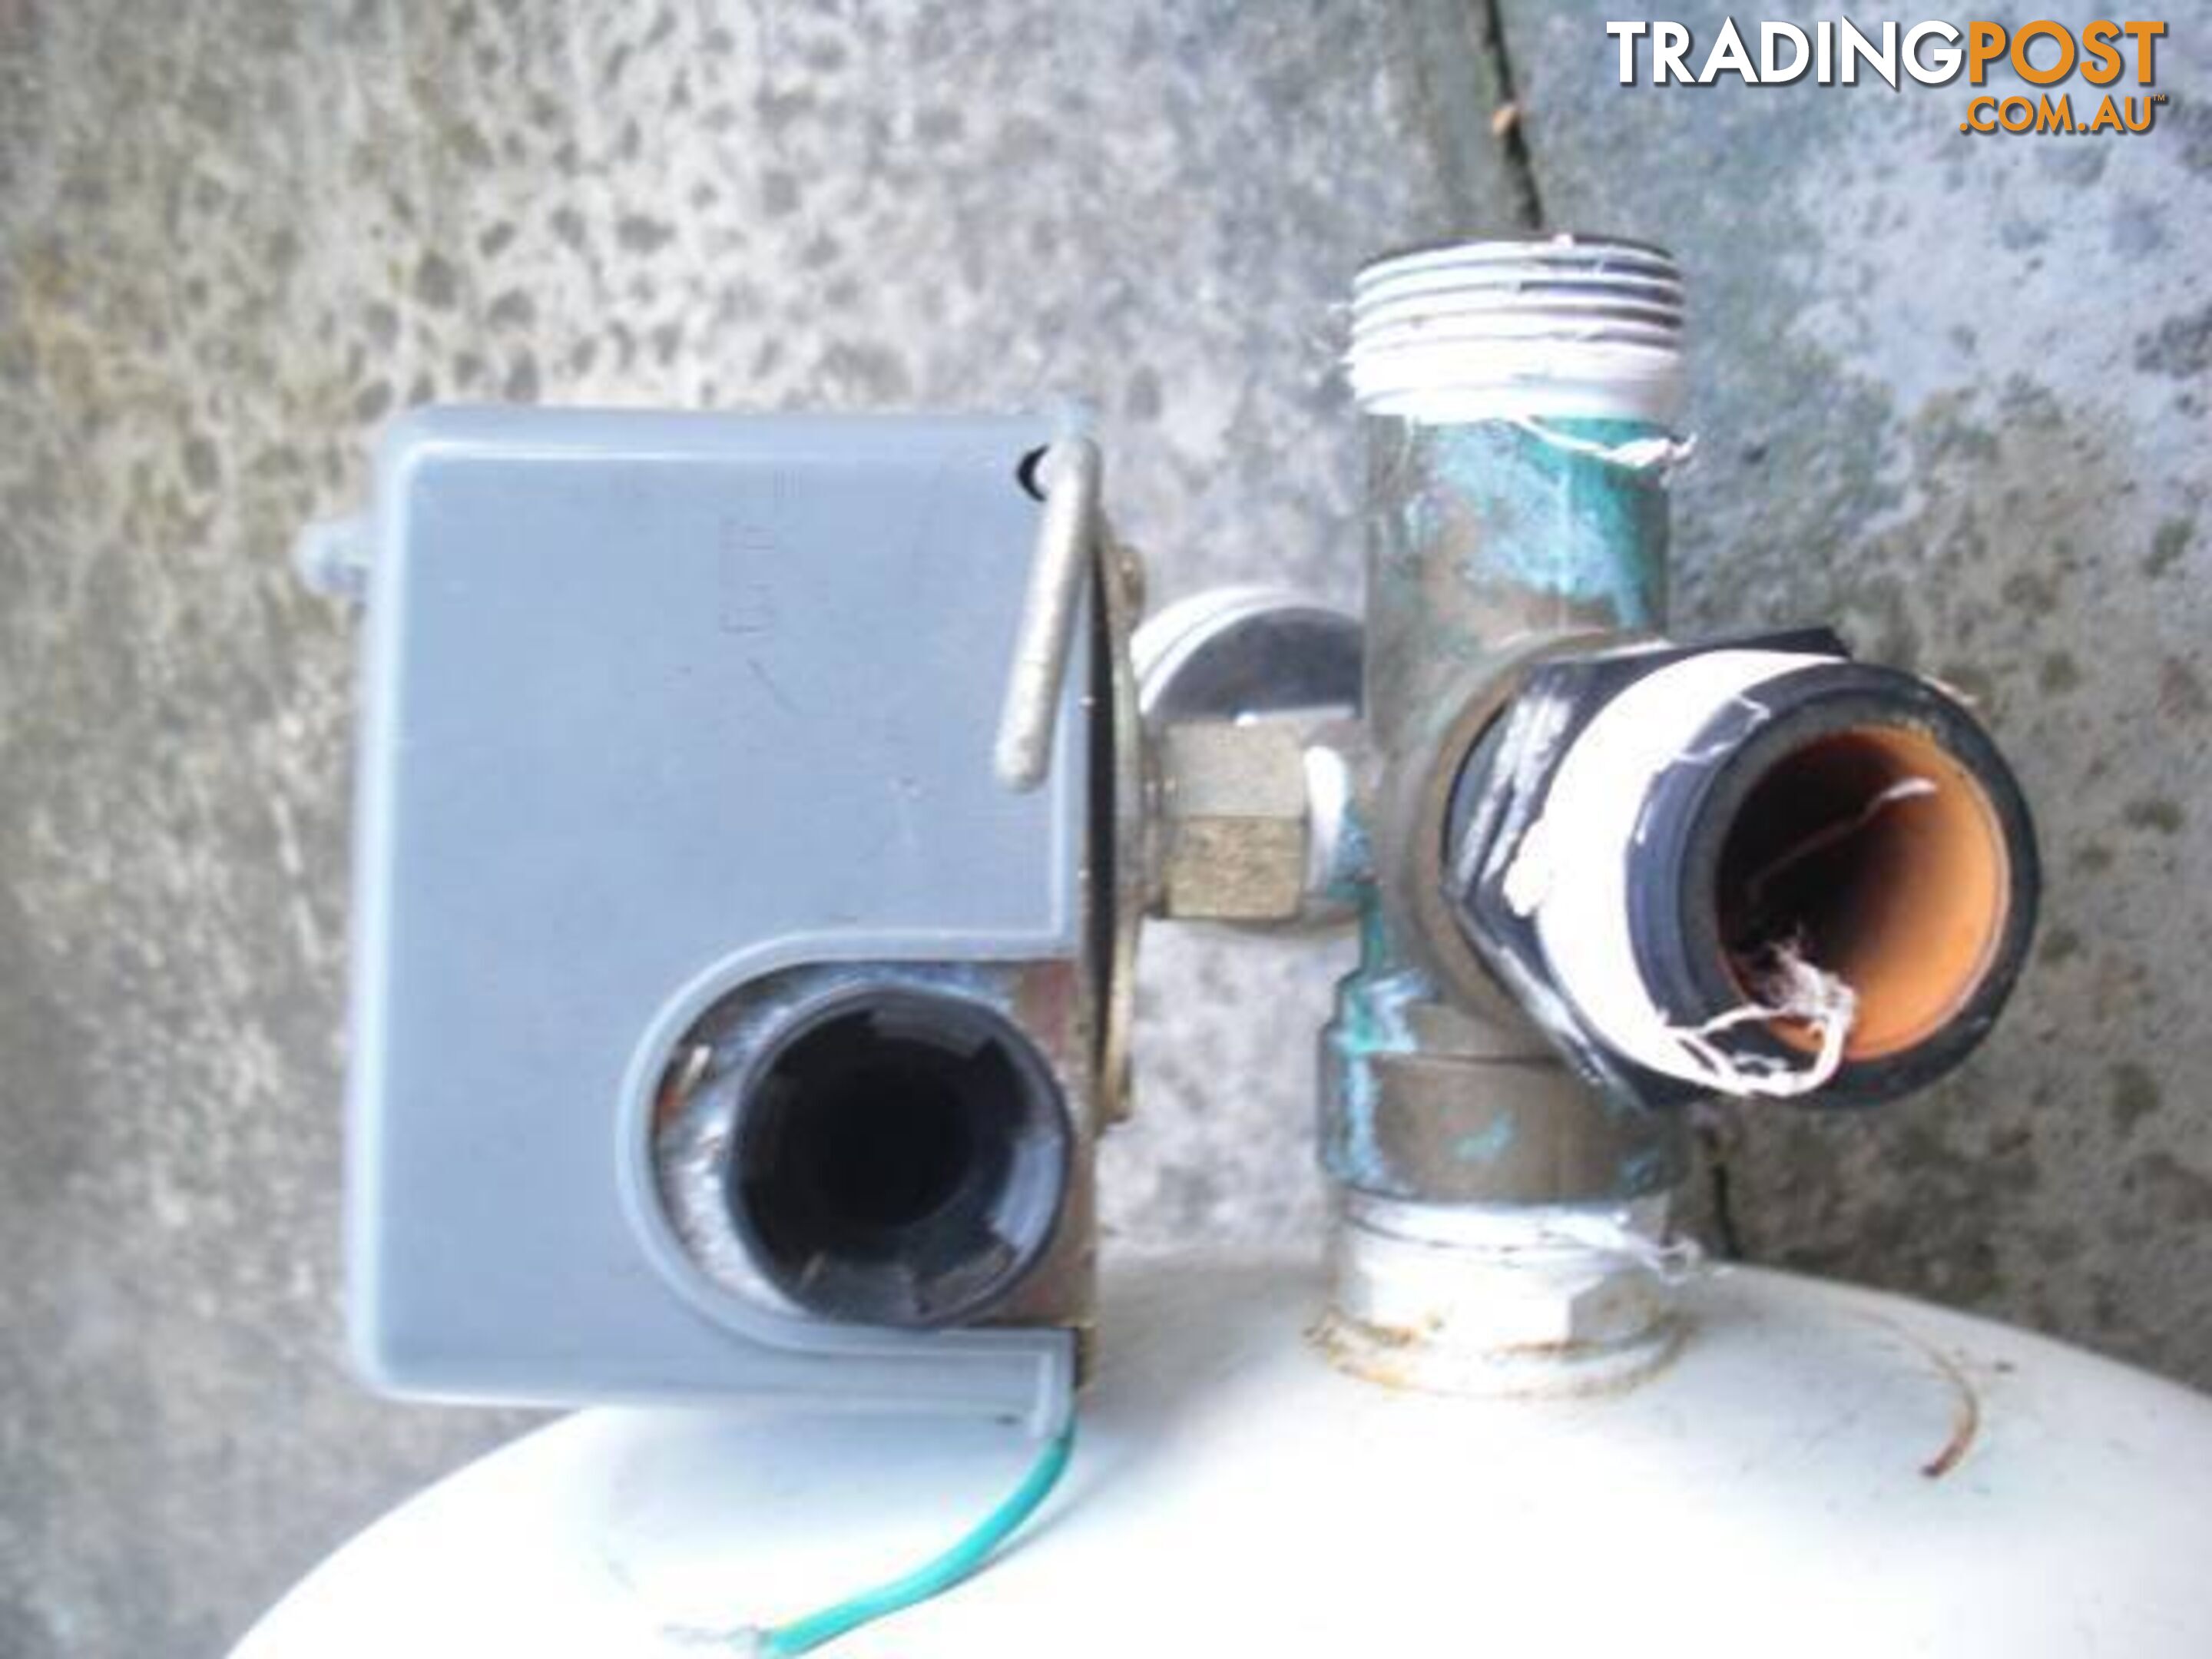 WATER PRESSURE PUMP TANK AND SOLINOID VALVE SWITCH & GUAGE